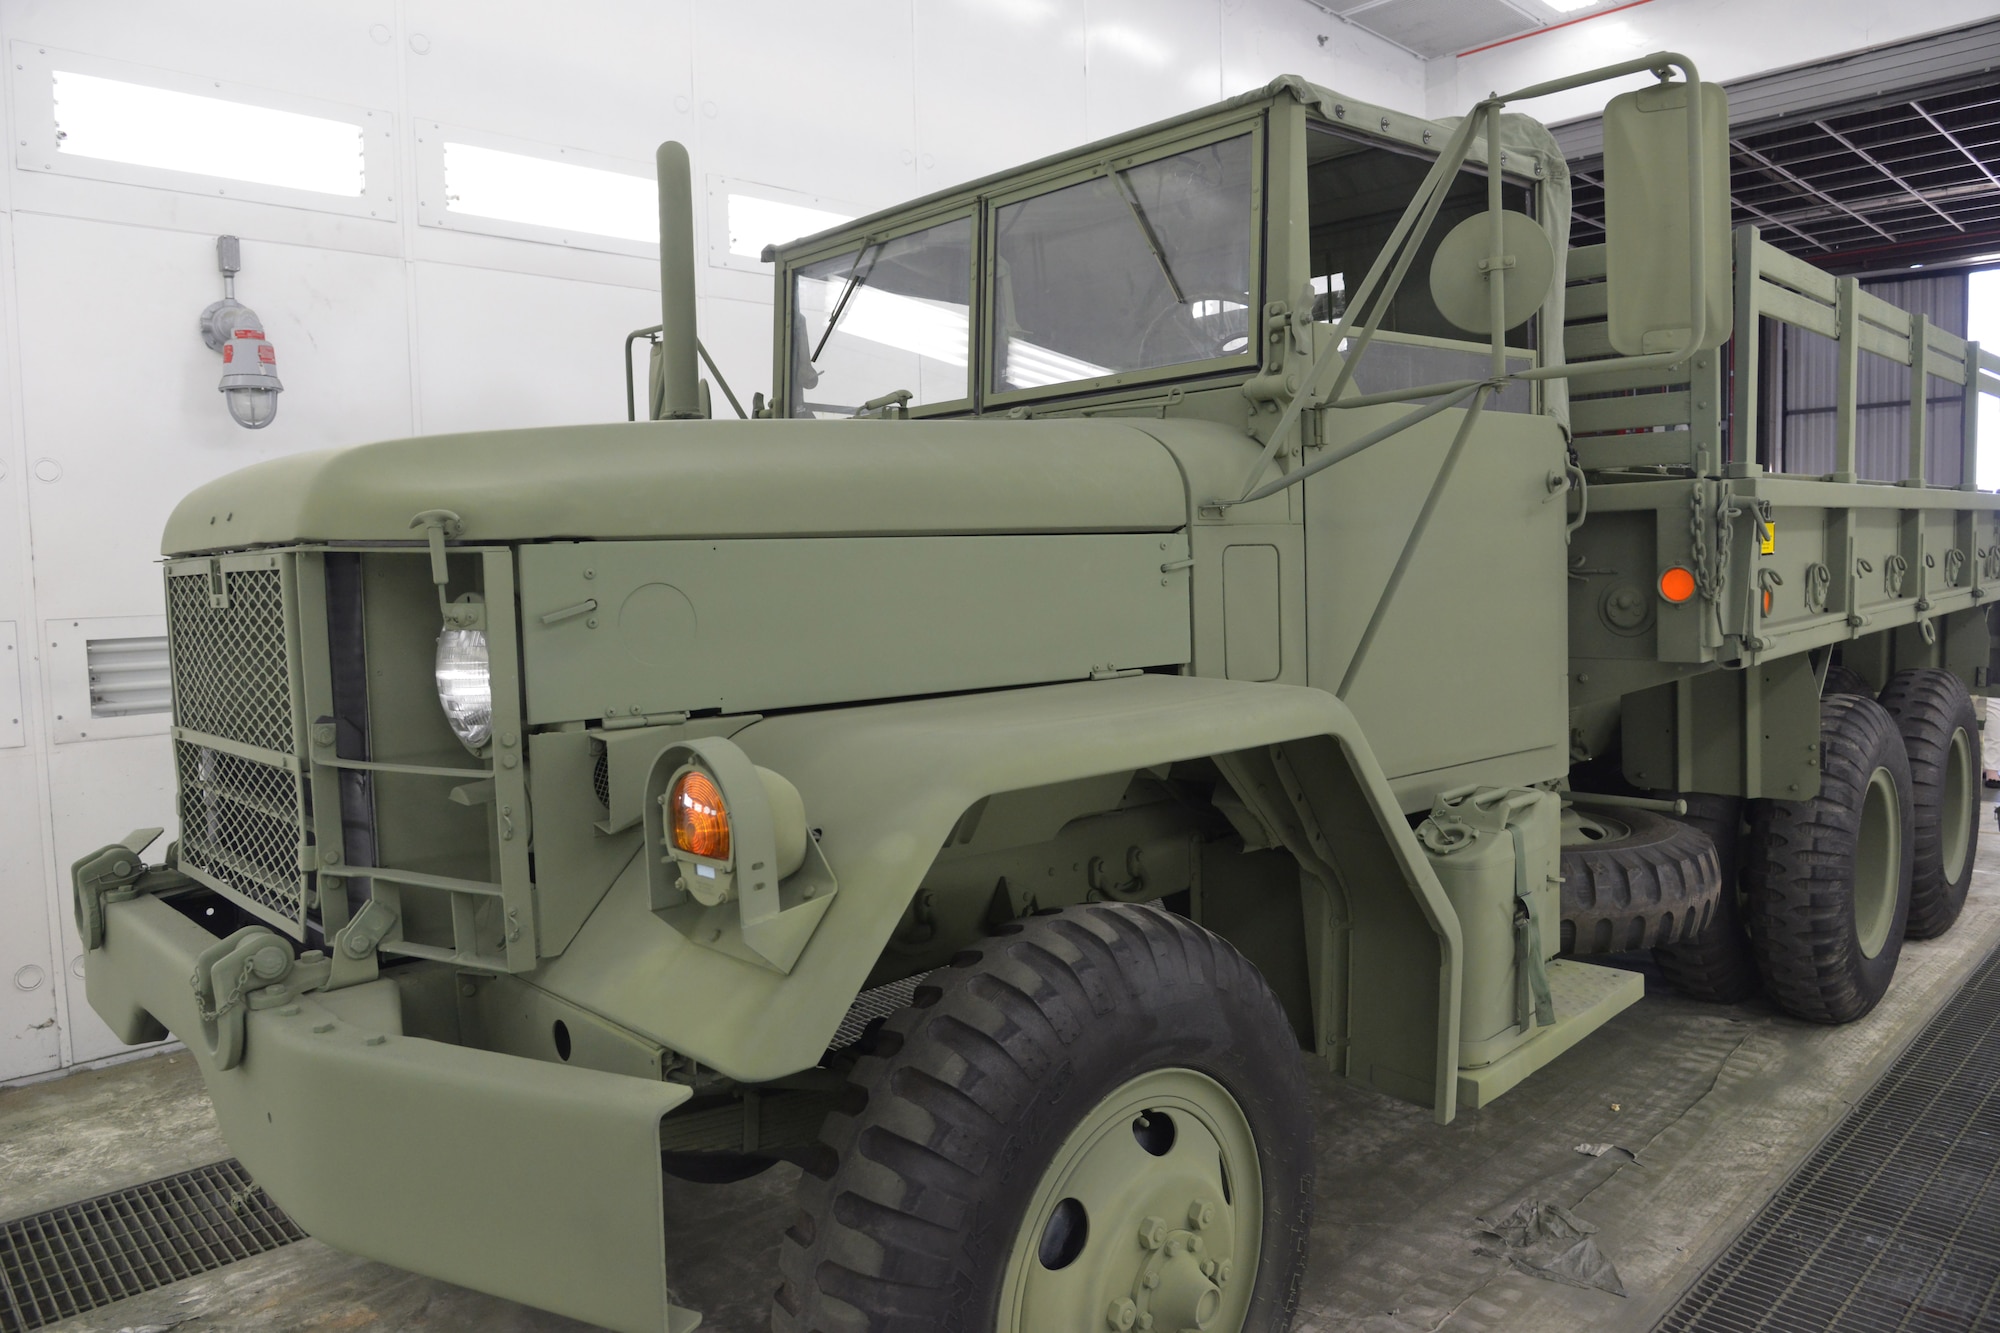 The M-35 started as a 1949 REO Motor Car Company design for a 2½ ton all-wheel-drive truck. The original 6-wheel M-34 version was quickly superseded by the 10-wheel M-35 design. While the basic M35 cargo truck is rated to carry 5,000 pounds (2,300 kg) off-road or 10,000 pounds (4,500 kg) on roads, they have been known to haul amounts twice as much.   (U.S. Air Force photo by Ray Crayton)